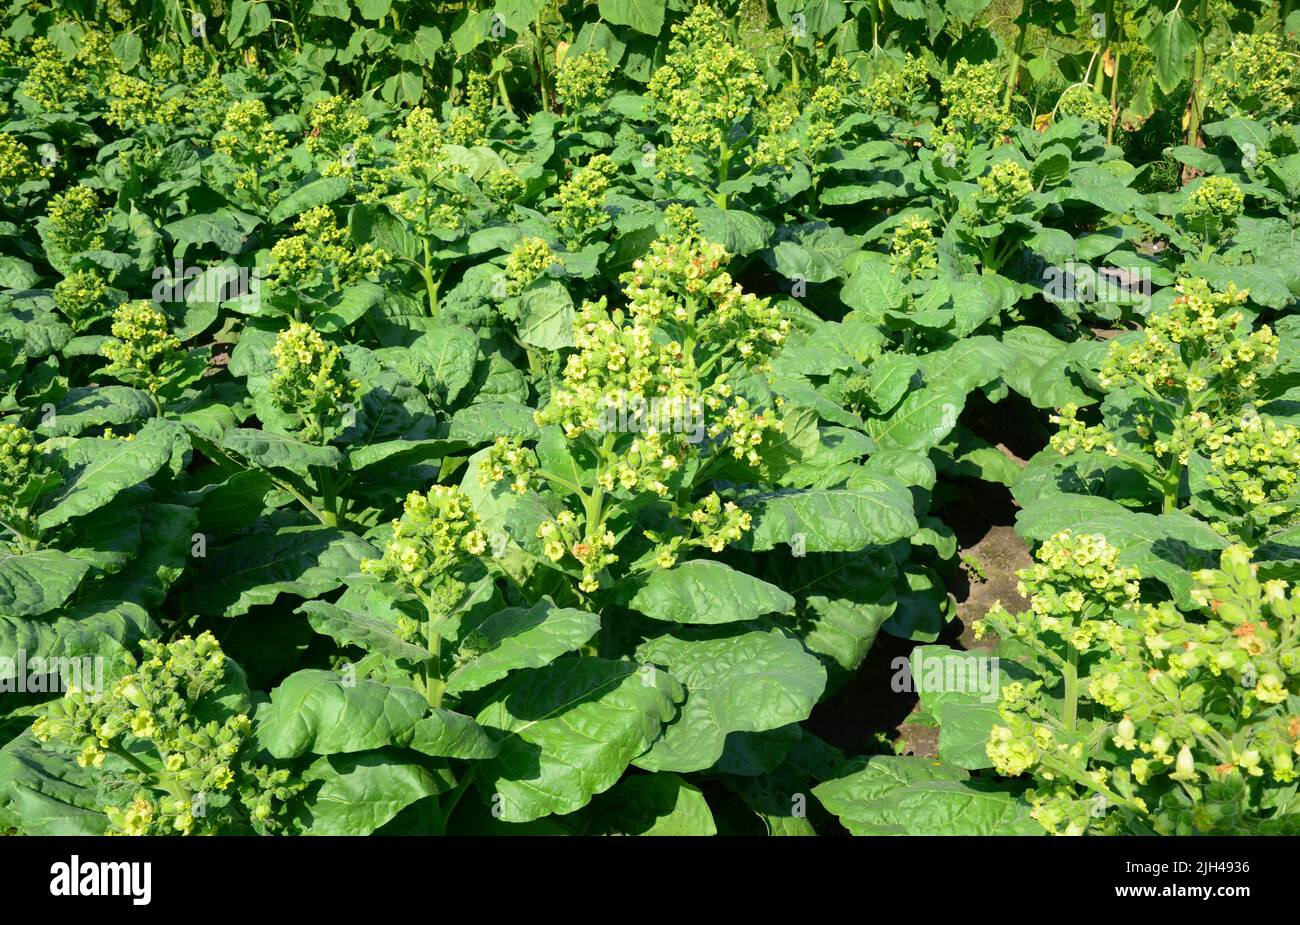 Growing tobacco on the farm. Tobacco plants blooming with yellow tiny flowers. Stock Photo